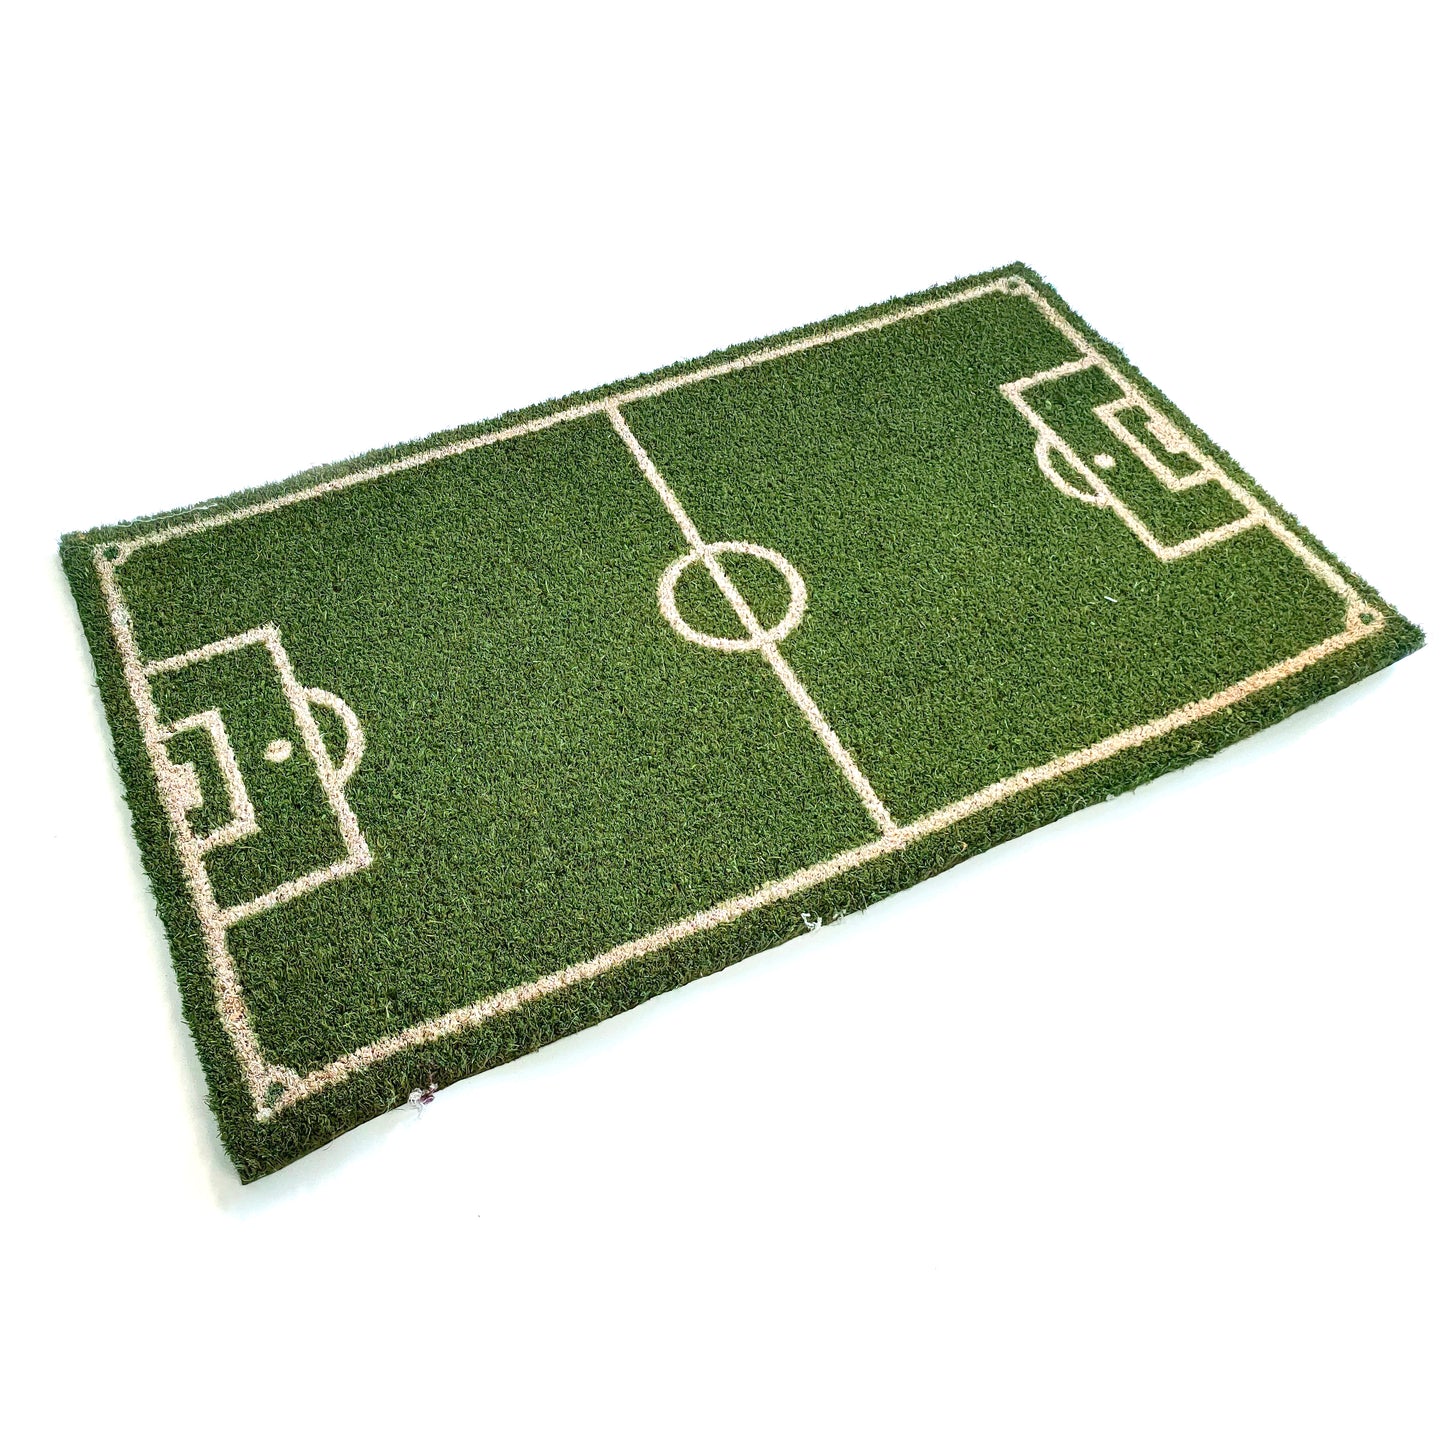 Green Football Pitch Coir Door Mat | 75cm x 45cm | Durable, Slip-Resistant, and Eco-Friendly.